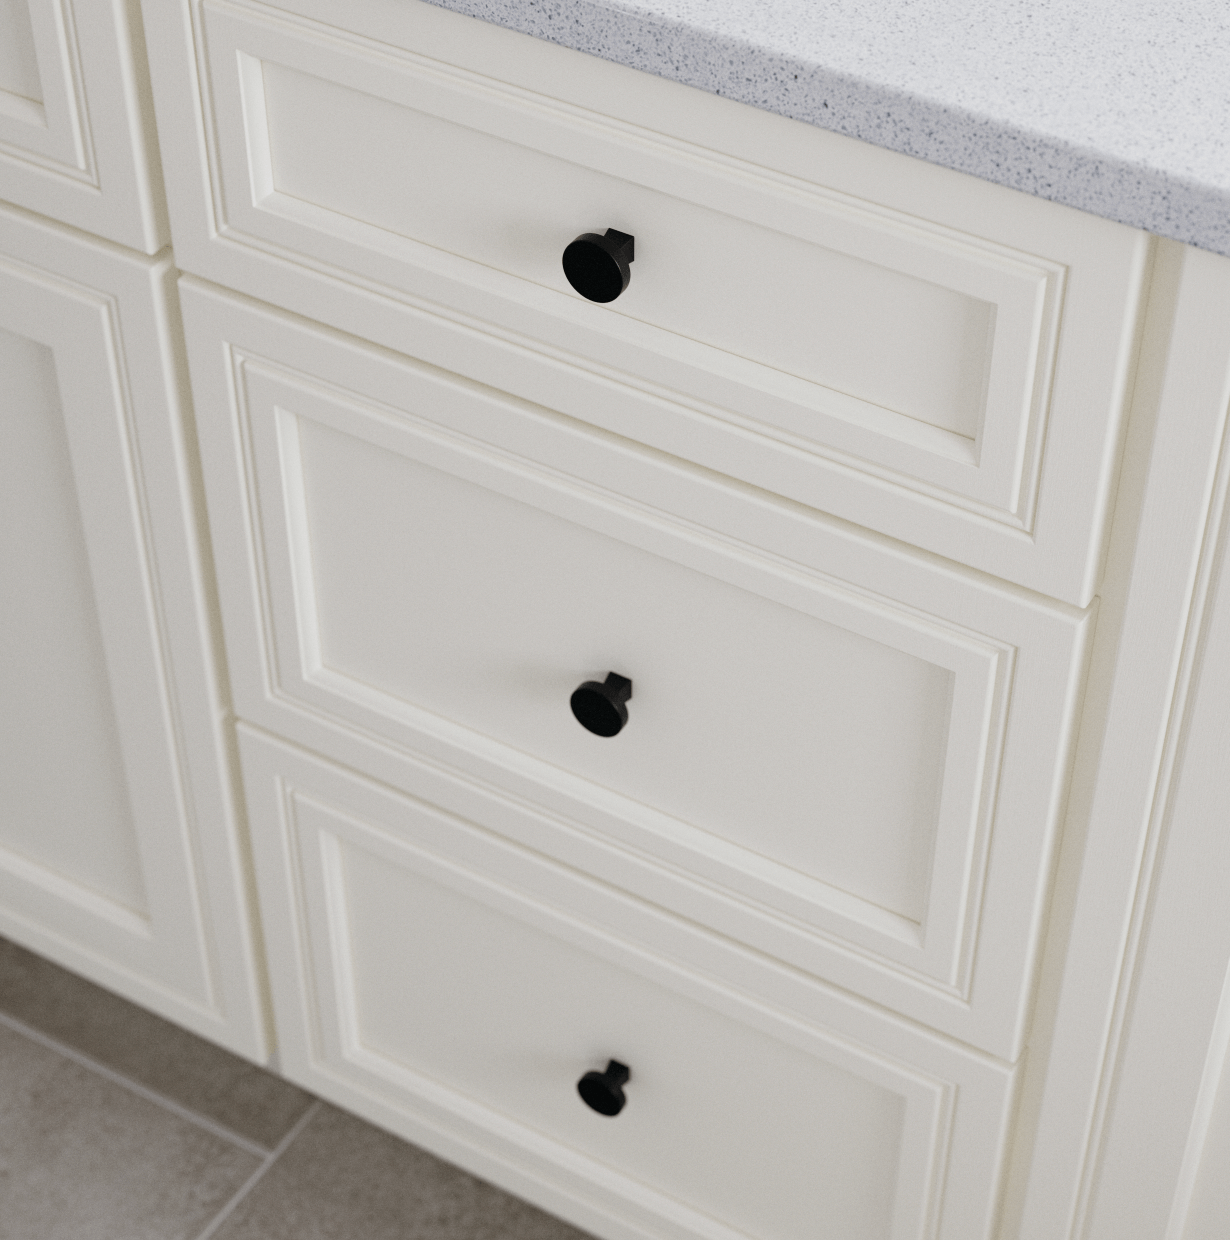 Cabinet Hardware The